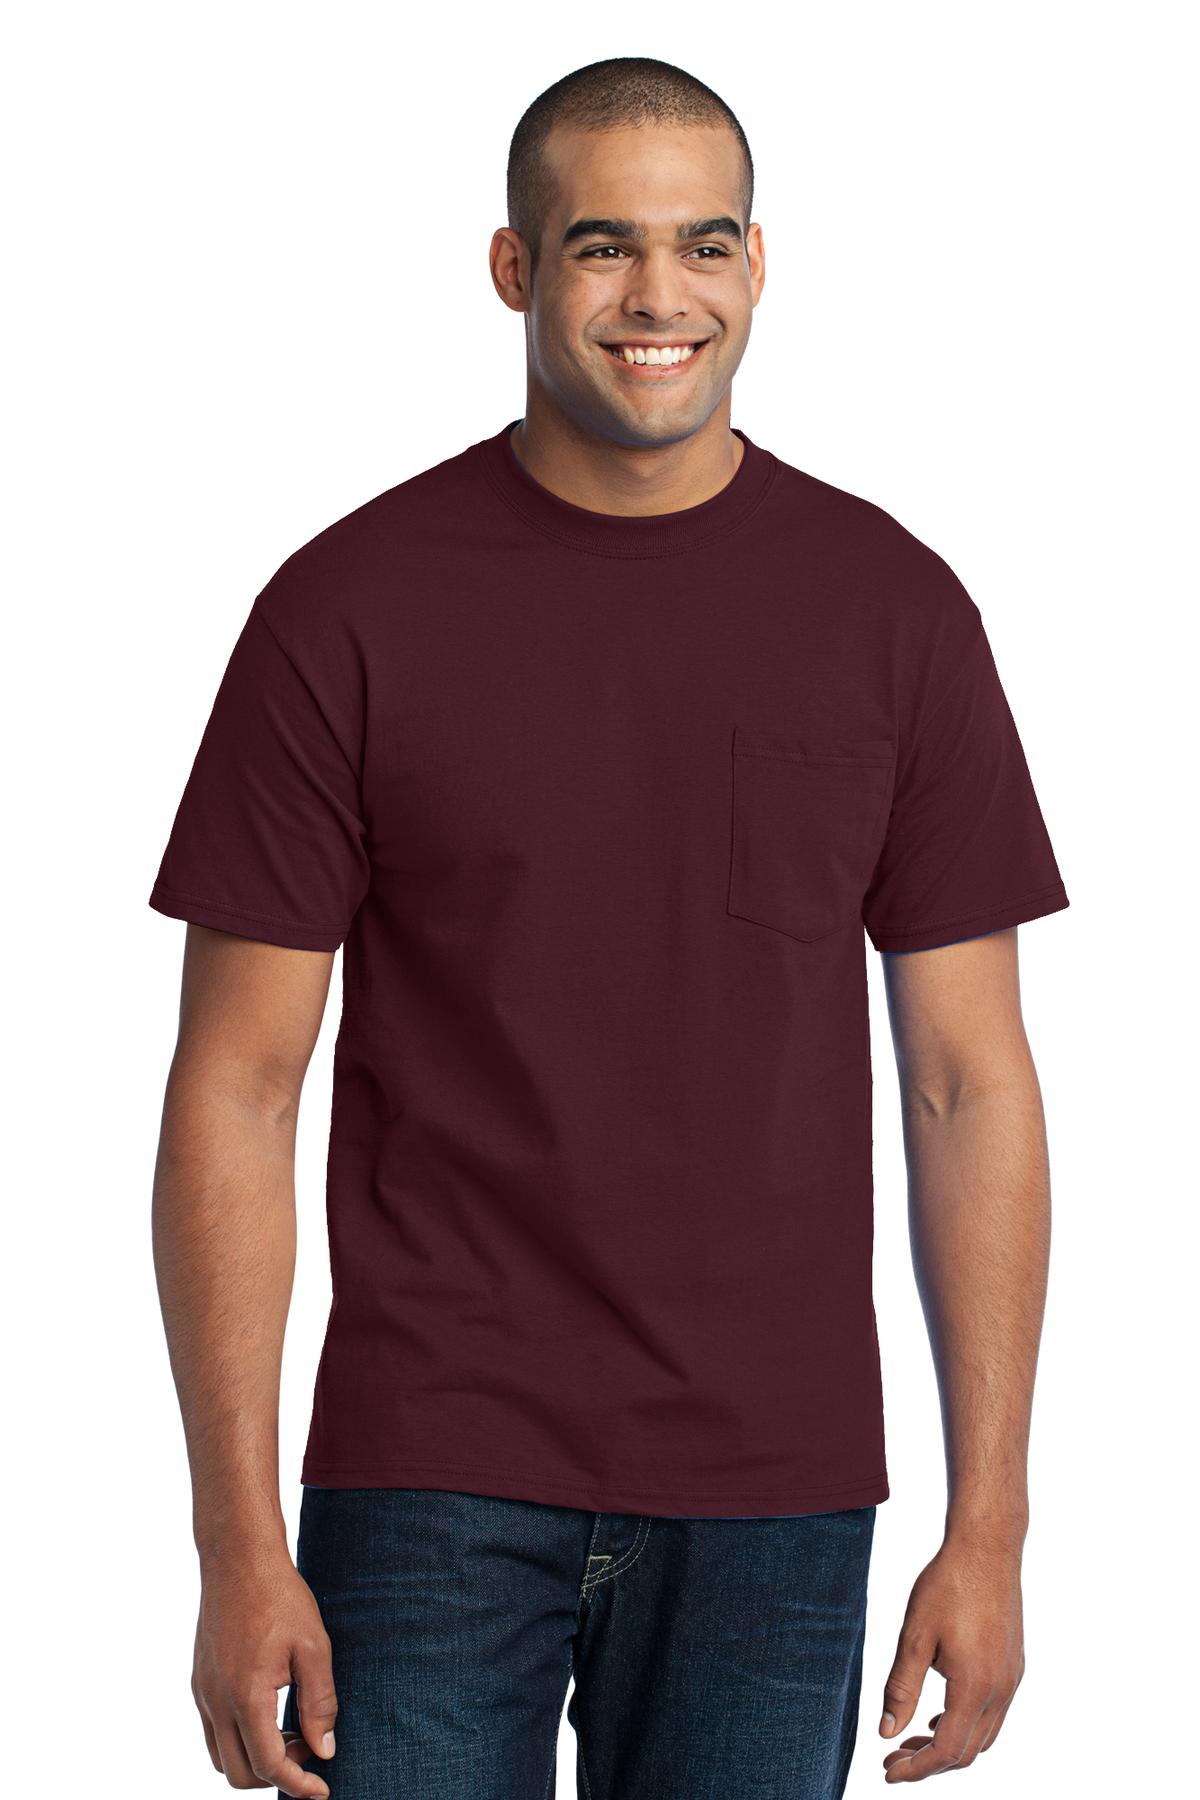 Swaasi Core - P&C® 5.5 oz 50/50 POCKET T-Shirt Extra Color with Print Logo